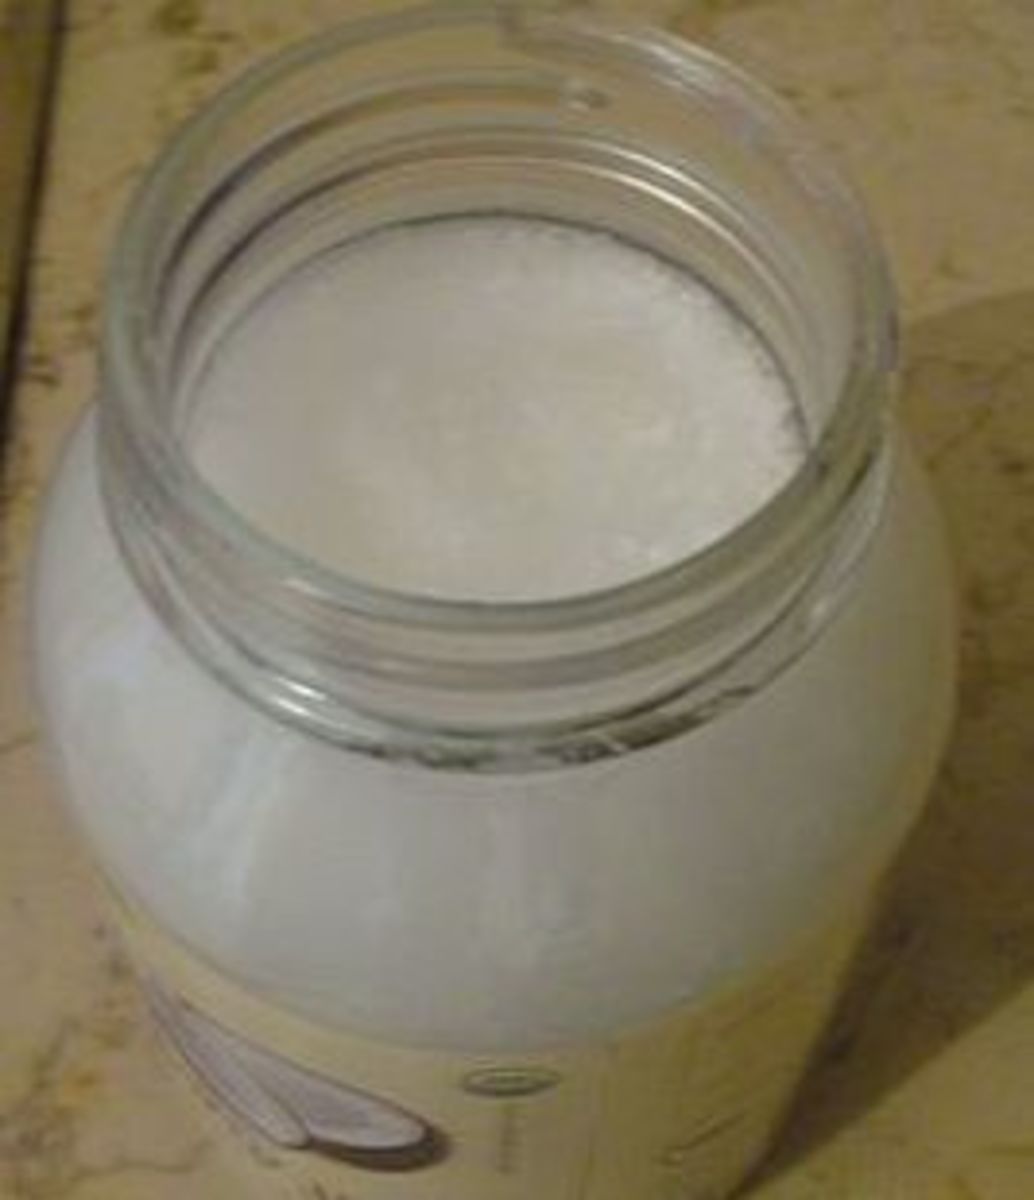 This is what coconut oil looks like. It's solid in its purest form.